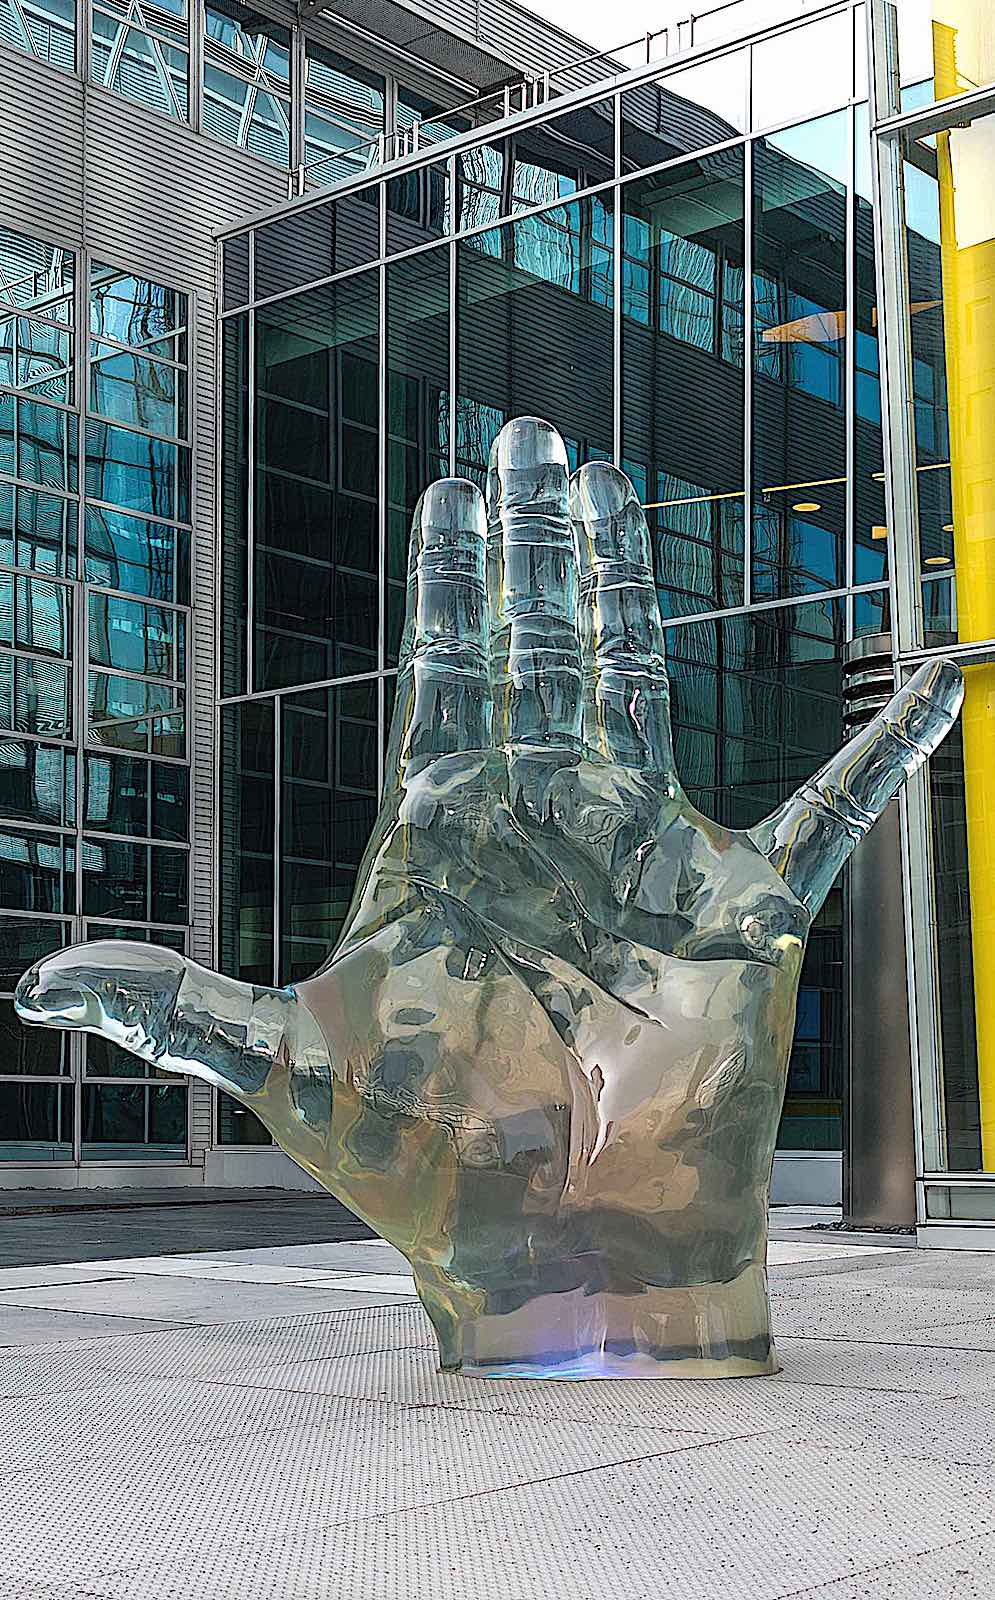 a glass sculpture of a giant hand,  Germany 2016